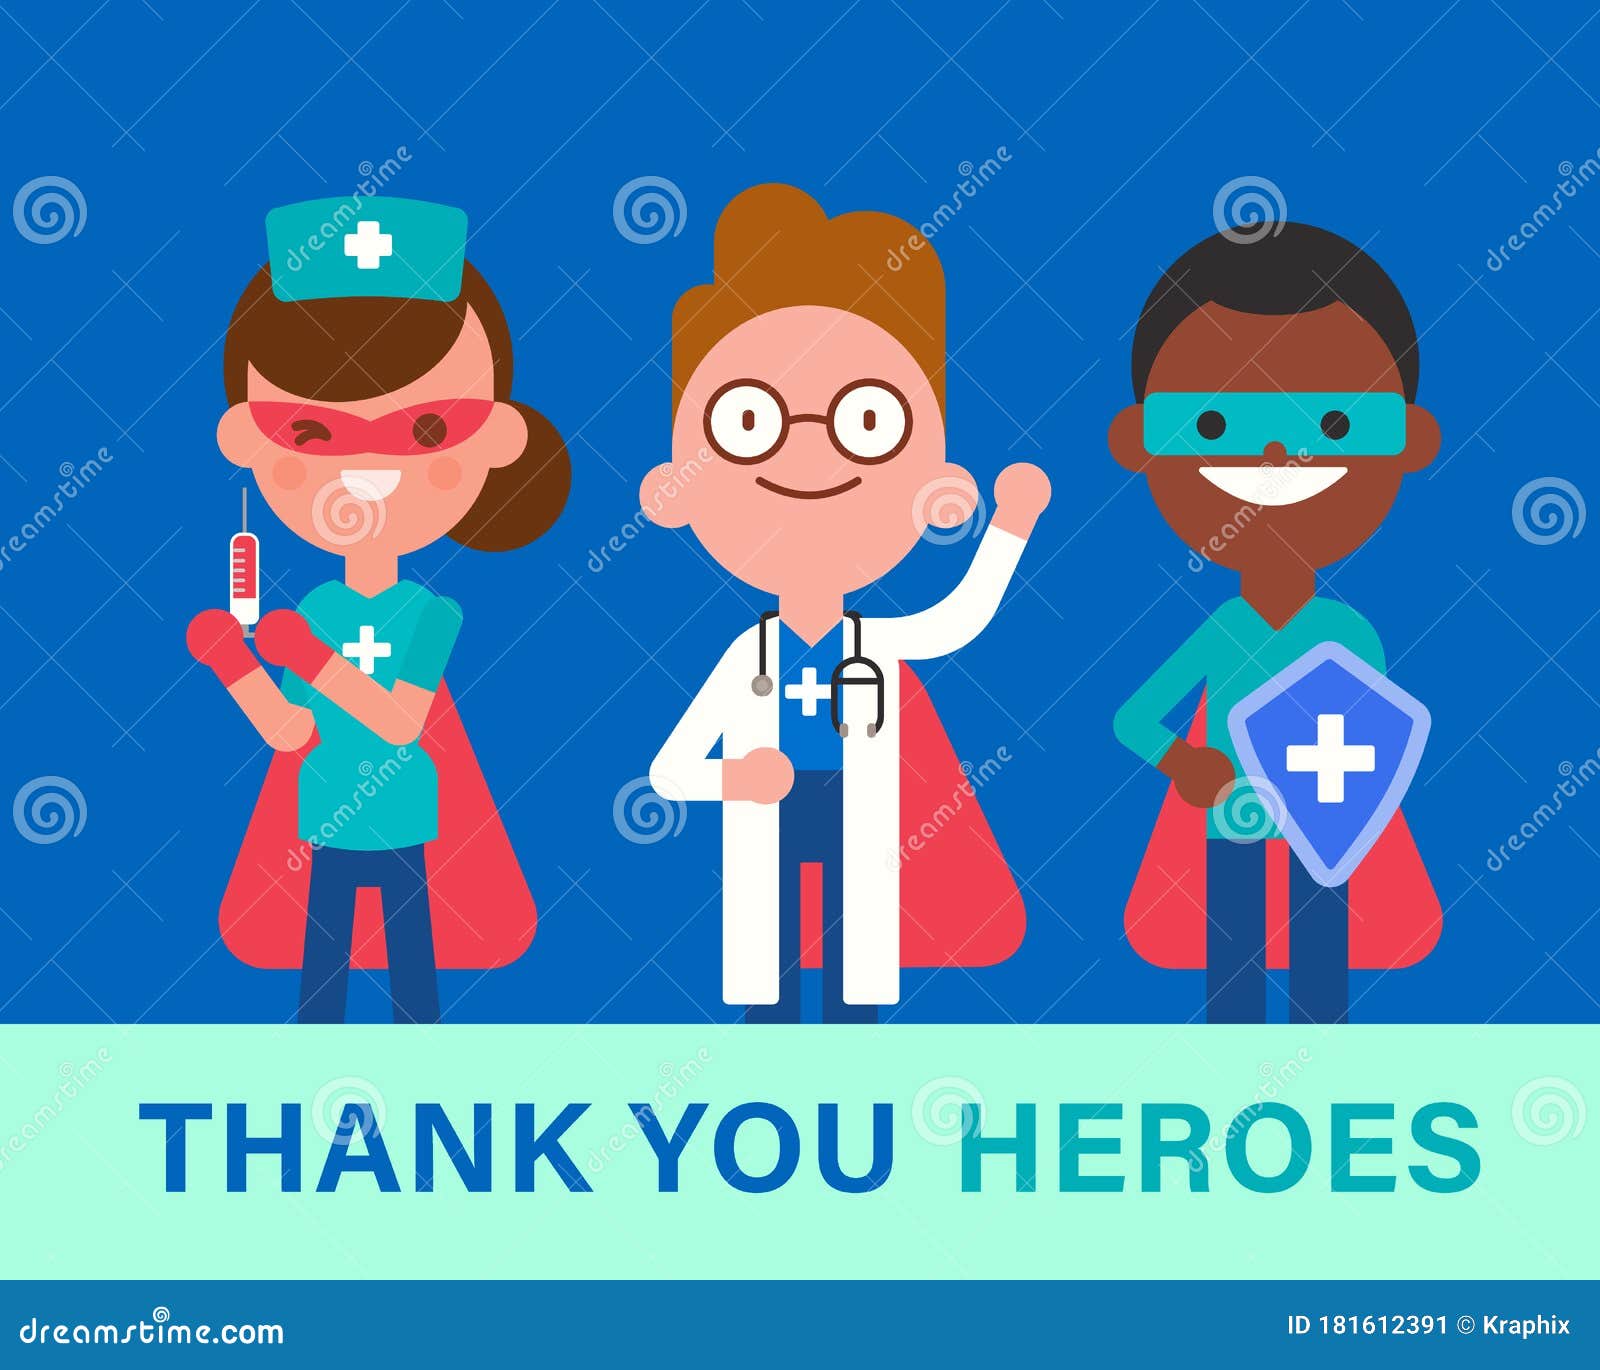 thank you heroes. team of doctors, nurse and medical workers in superhero costume. fighting covid-19 virus epidemic concept.